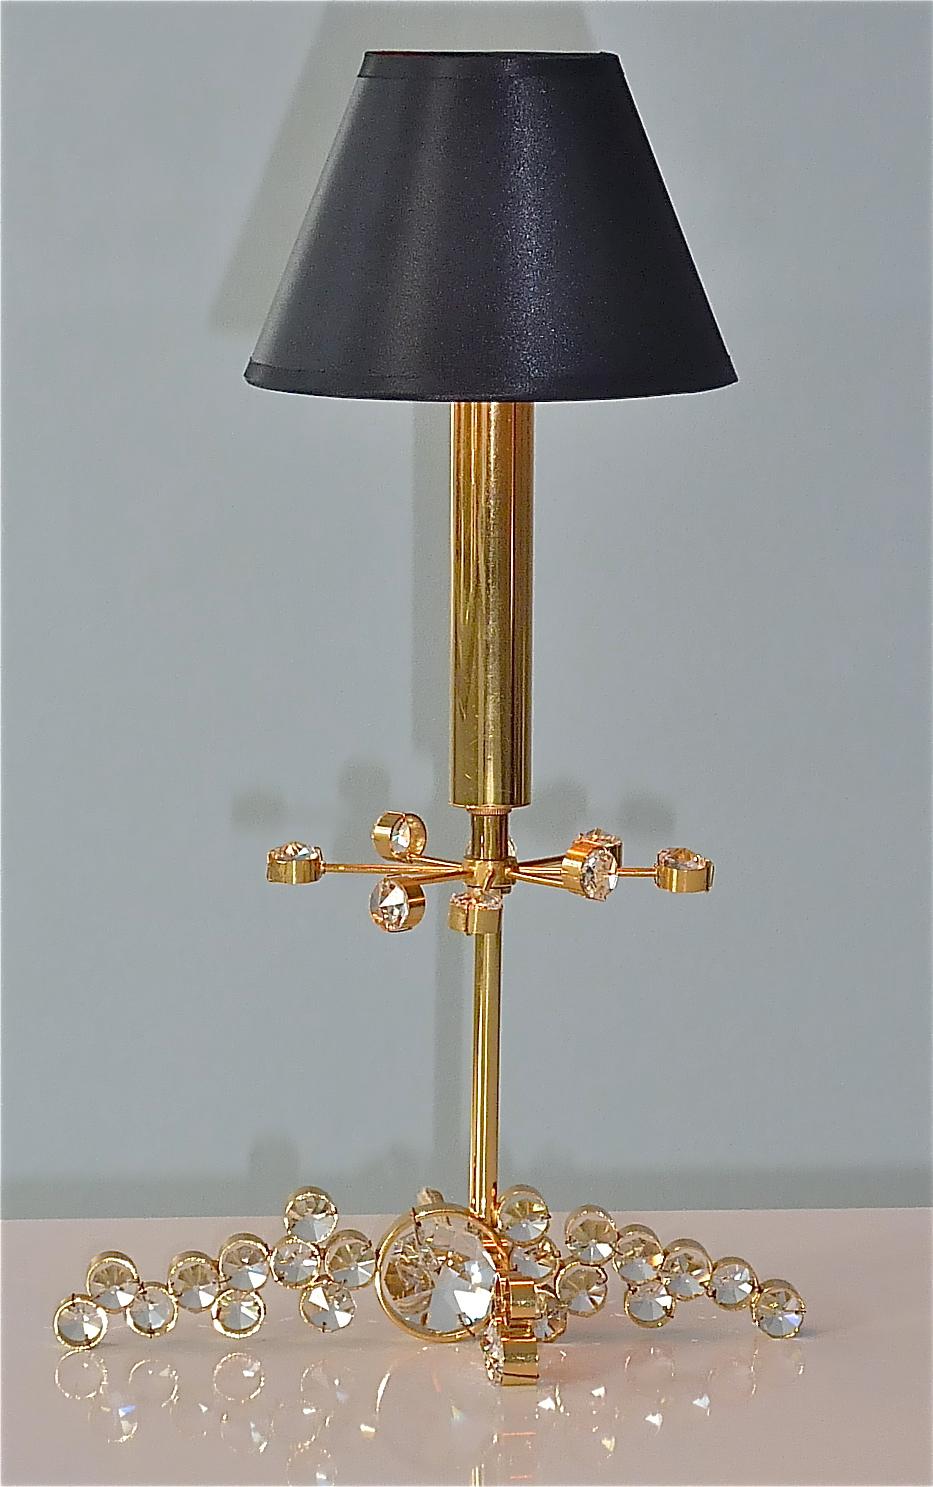 Rare and early precious midcentury table lamp designed and executed by Palwa, Germany around 1950s to 1960s. The table lamp has beautifully hand-cut and polished faceted octagonal crystal glass prisms which sparkle like diamonds, mounted on a